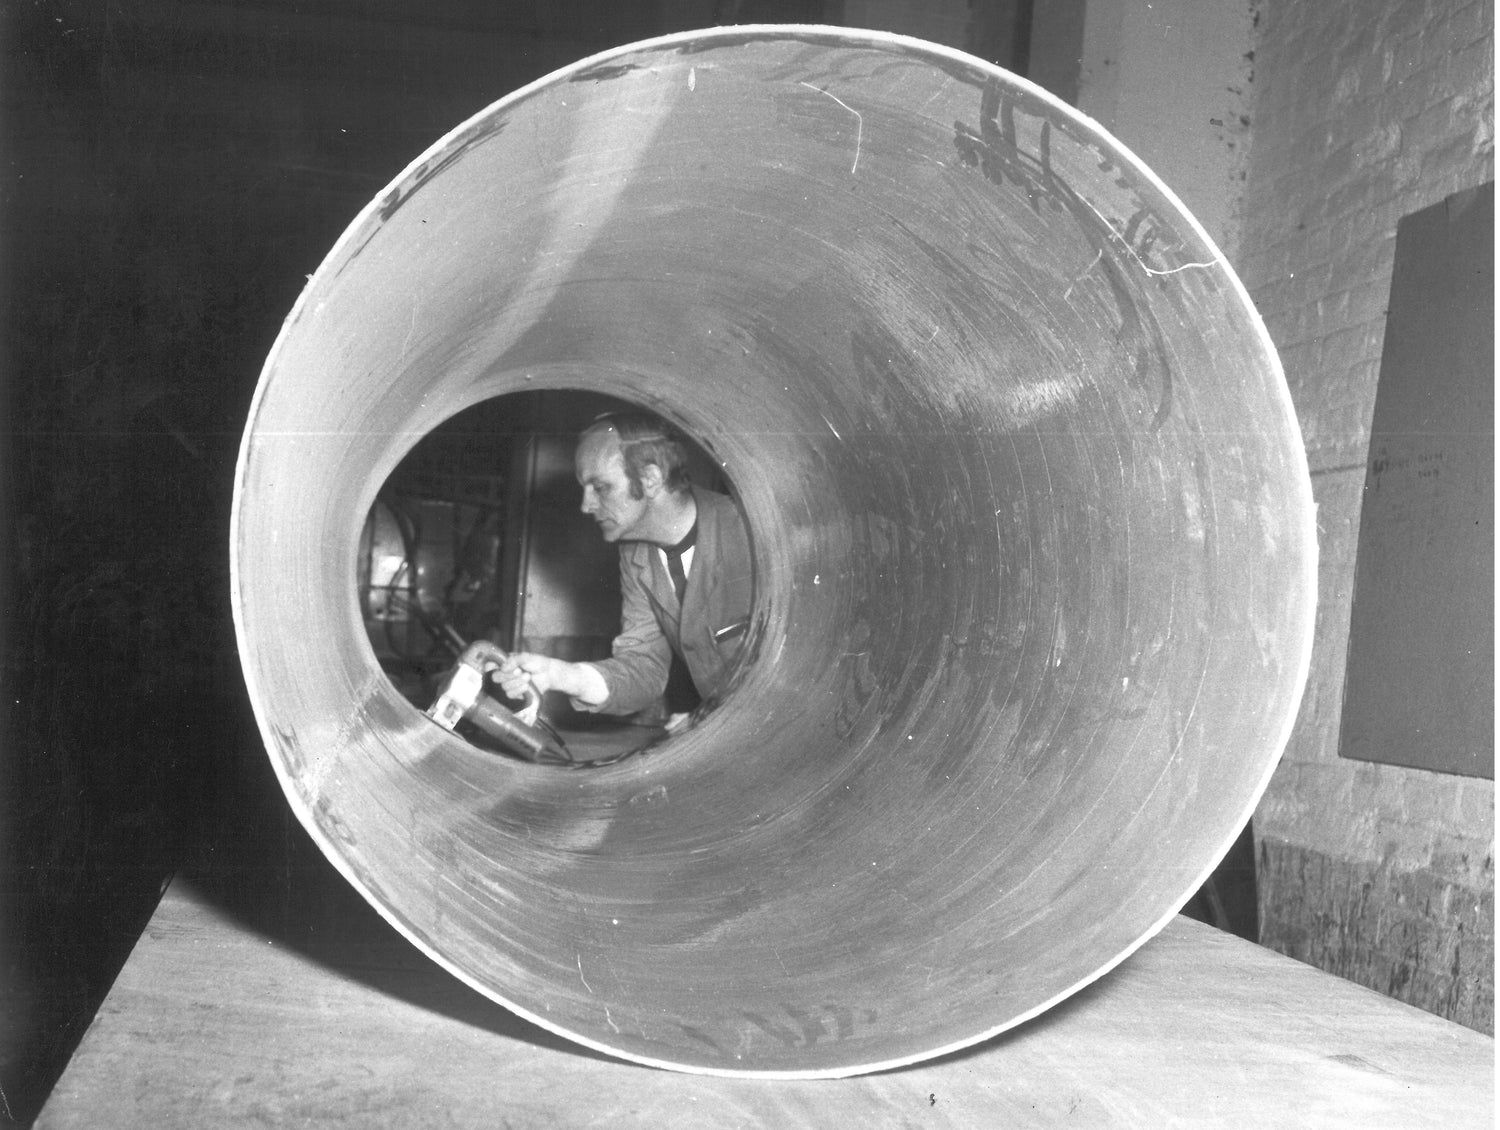 A black and white photograph shows an employee sanding the inside of a tank